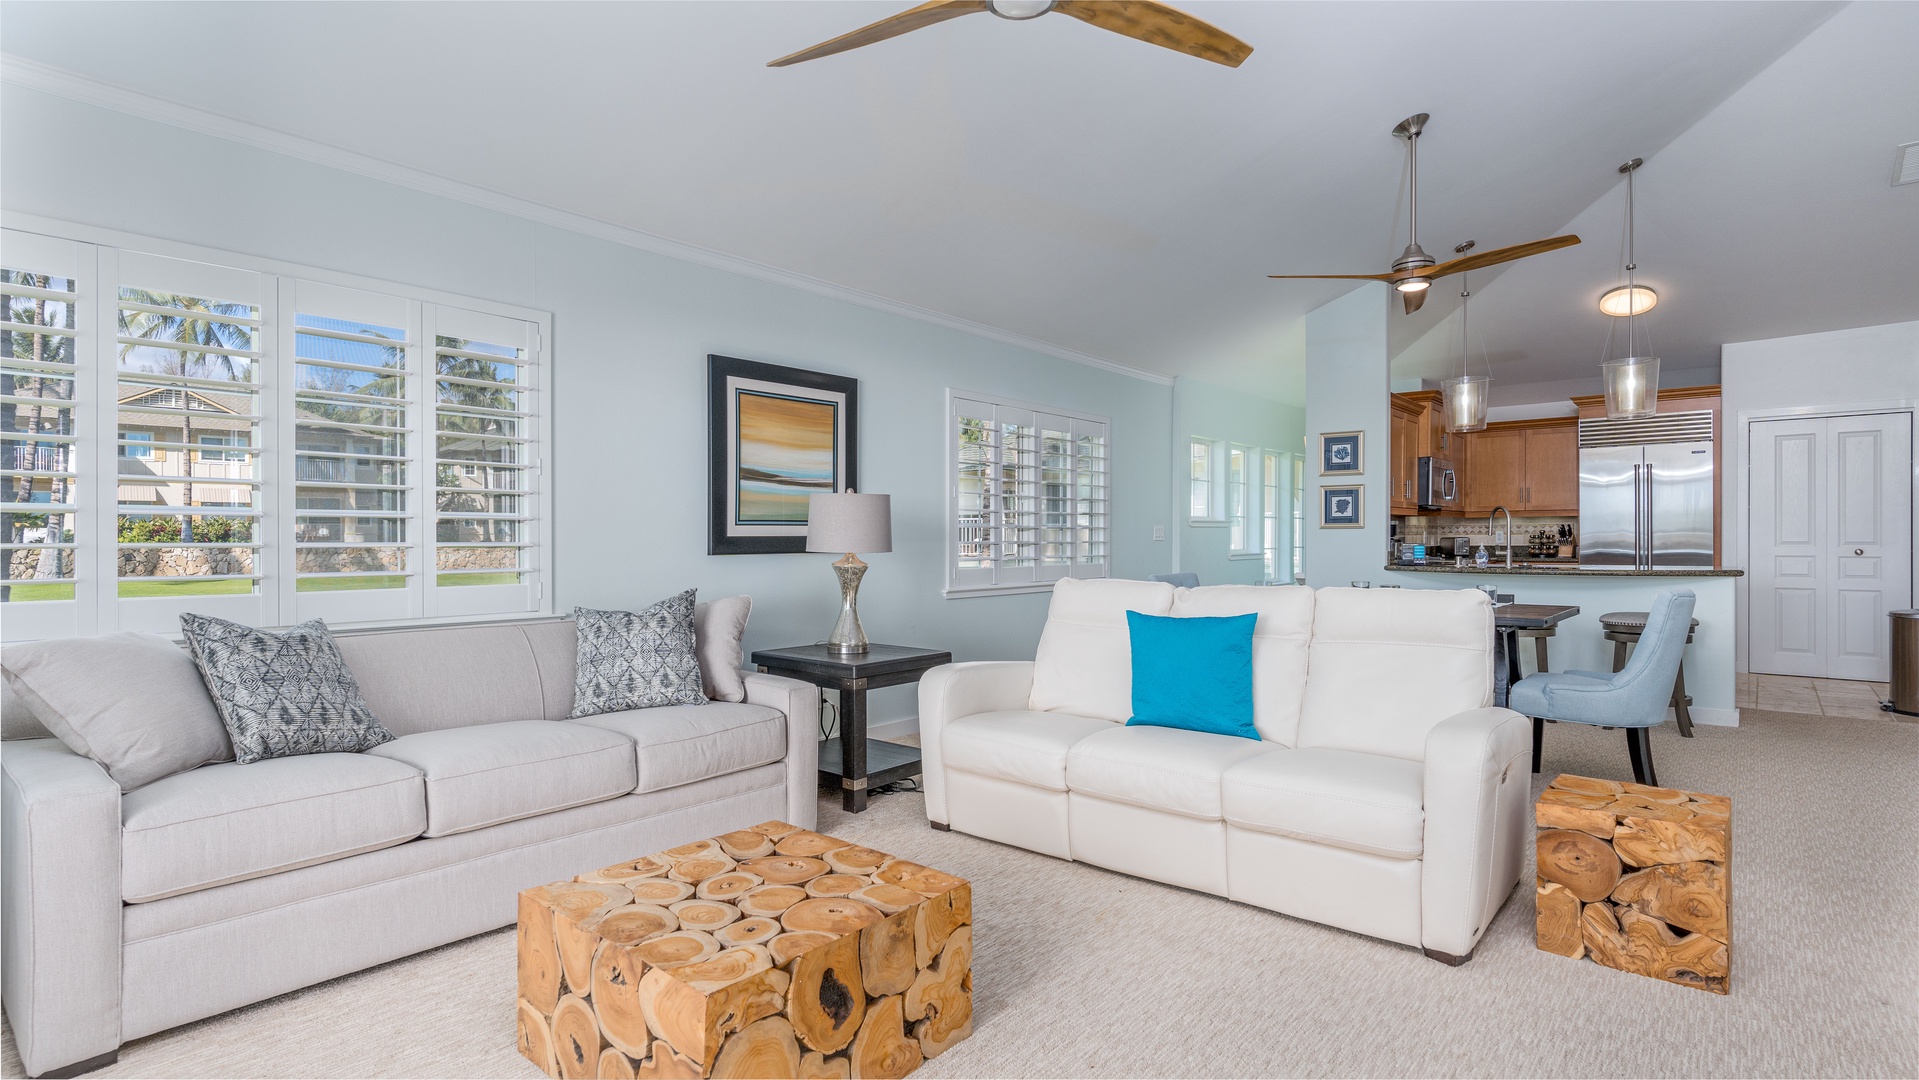 Kapolei Vacation Rentals, Kai Lani 21C - Sink into the plush seating in the living area surrounded by natural wood and ocean tones.